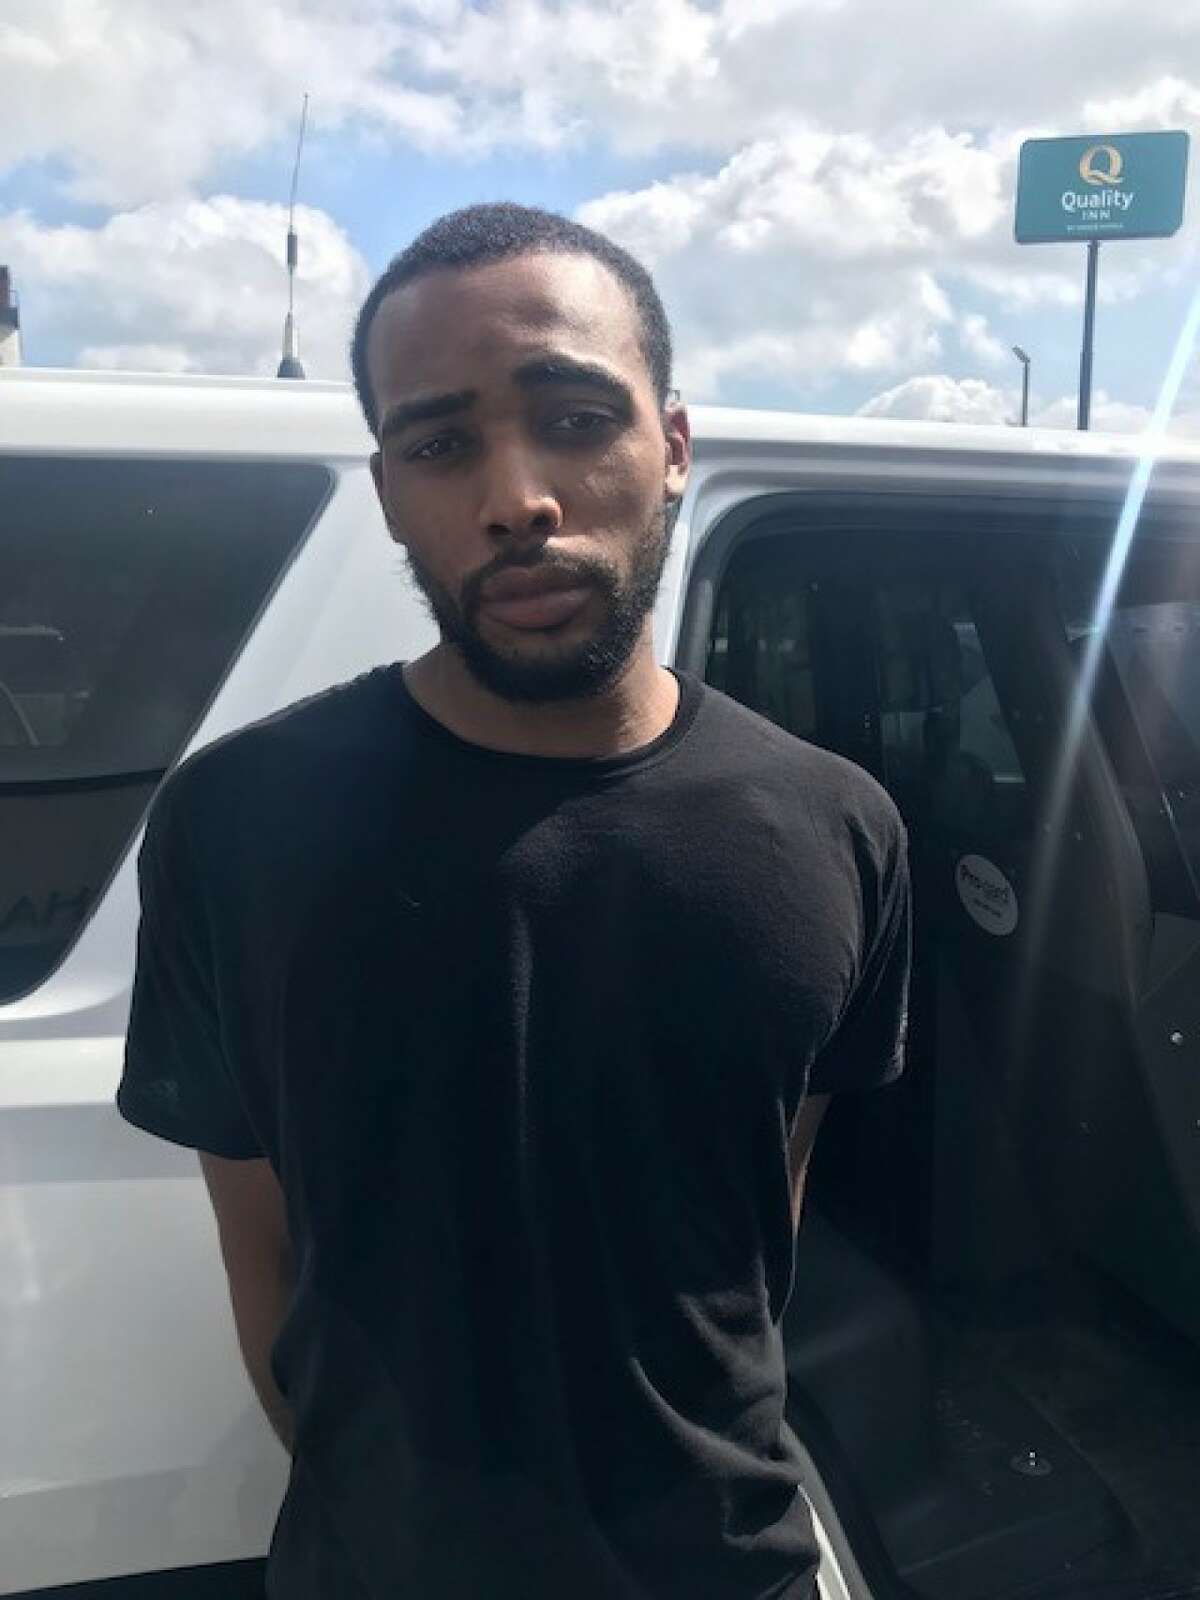 Jouwan D. William Thomas, 24, was arrested in connection with a shooting at a downtown hotel on Friday, June 25.